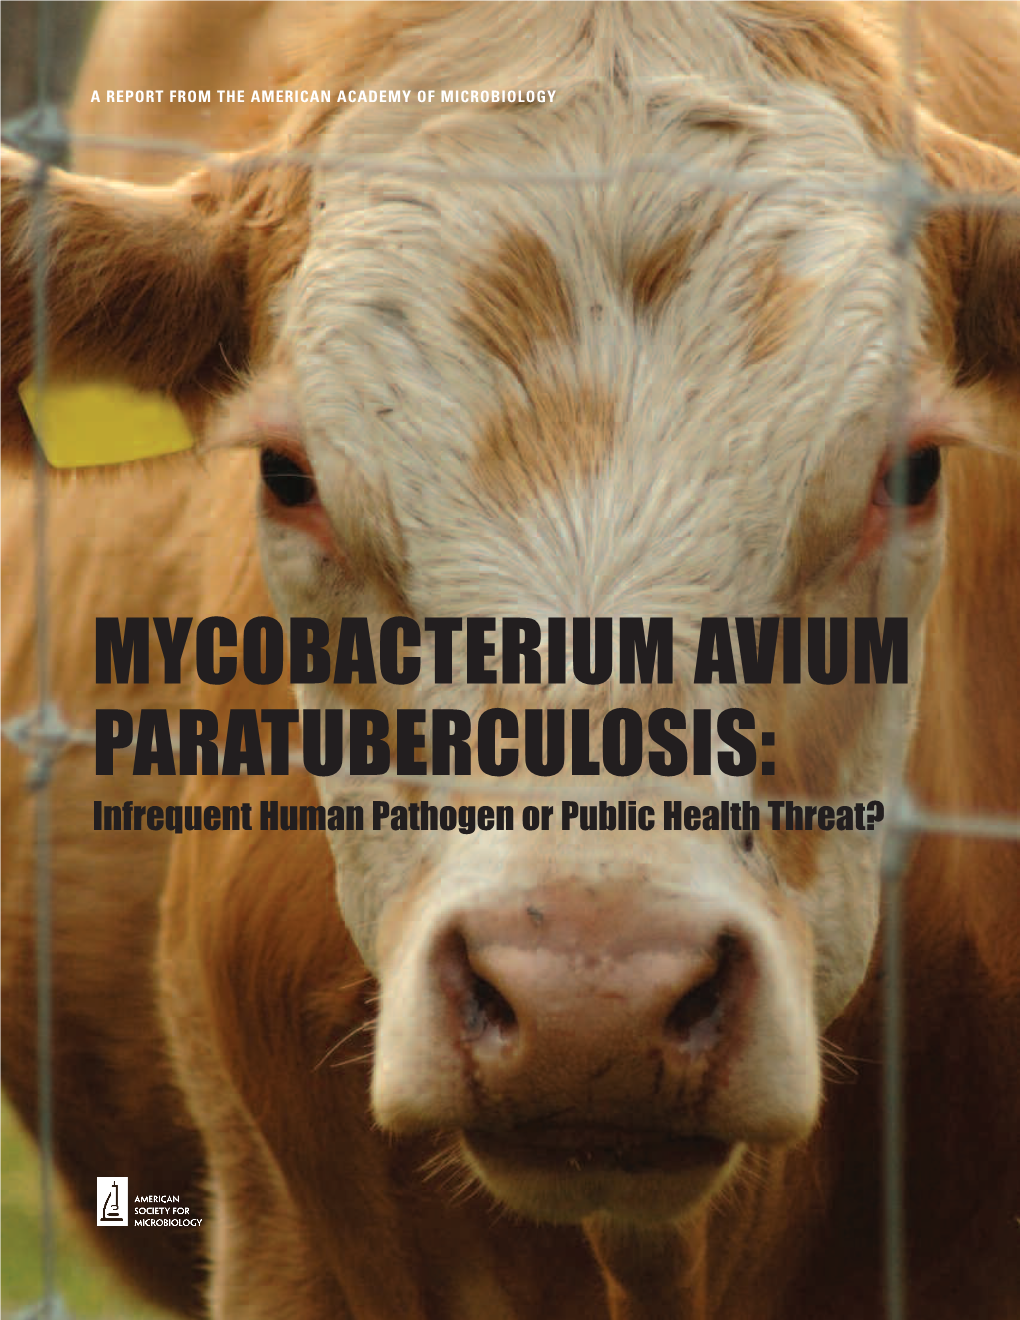 MYCOBACTERIUM AVIUM PARATUBERCULOSIS: Infrequent Human Pathogen Or Public Health Threat? a REPORT from the AMERICAN ACADEMY of MICROBIOLOGY